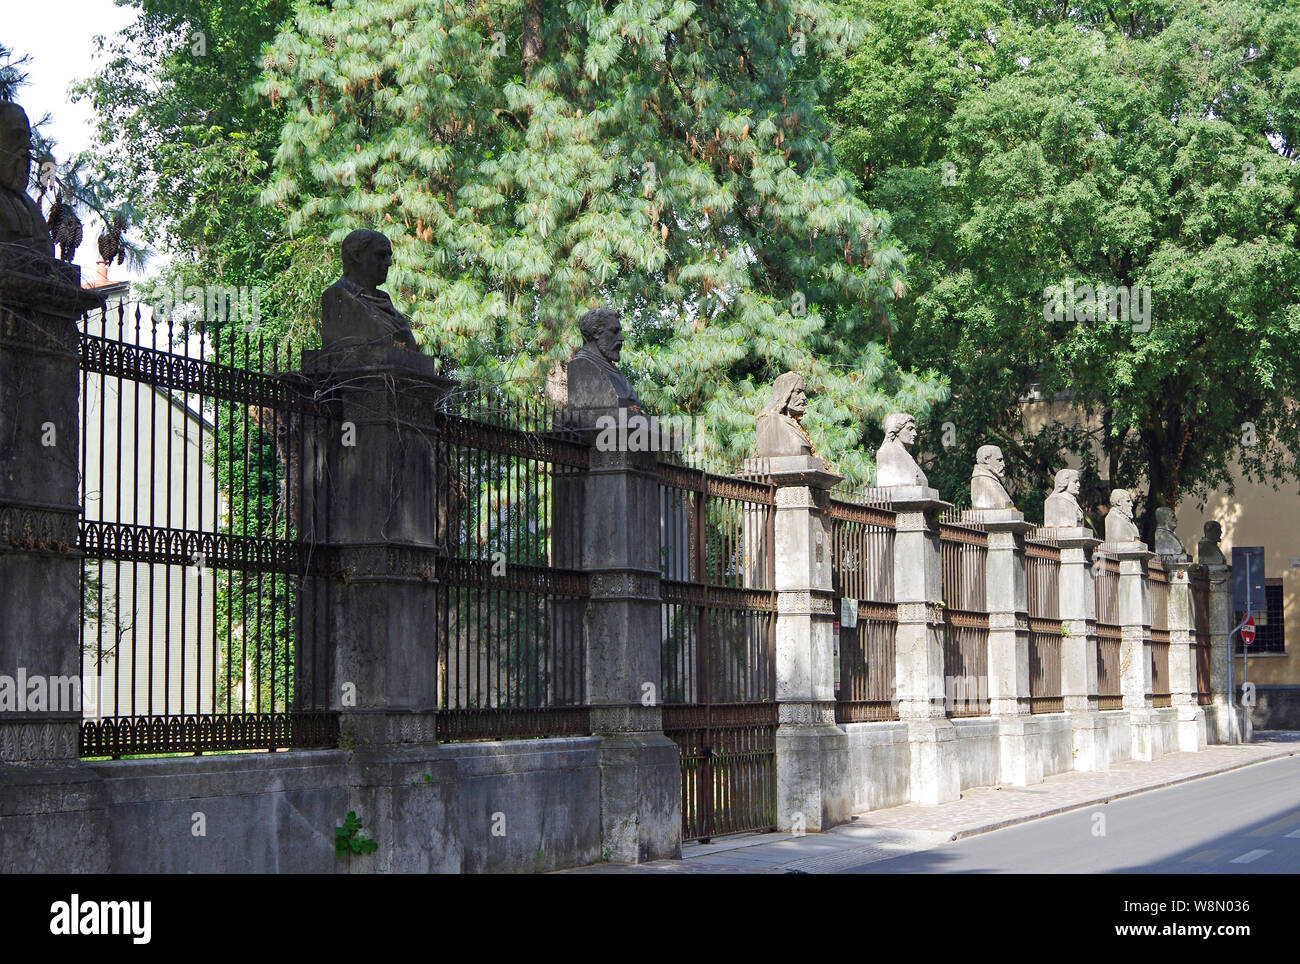 Rear wall of the garden of the Palazzo Cavriani, in Mantua, Italy, 13 stone piers bearing portrait busts of notable men of the Mantuan Renaissance Stock Photo